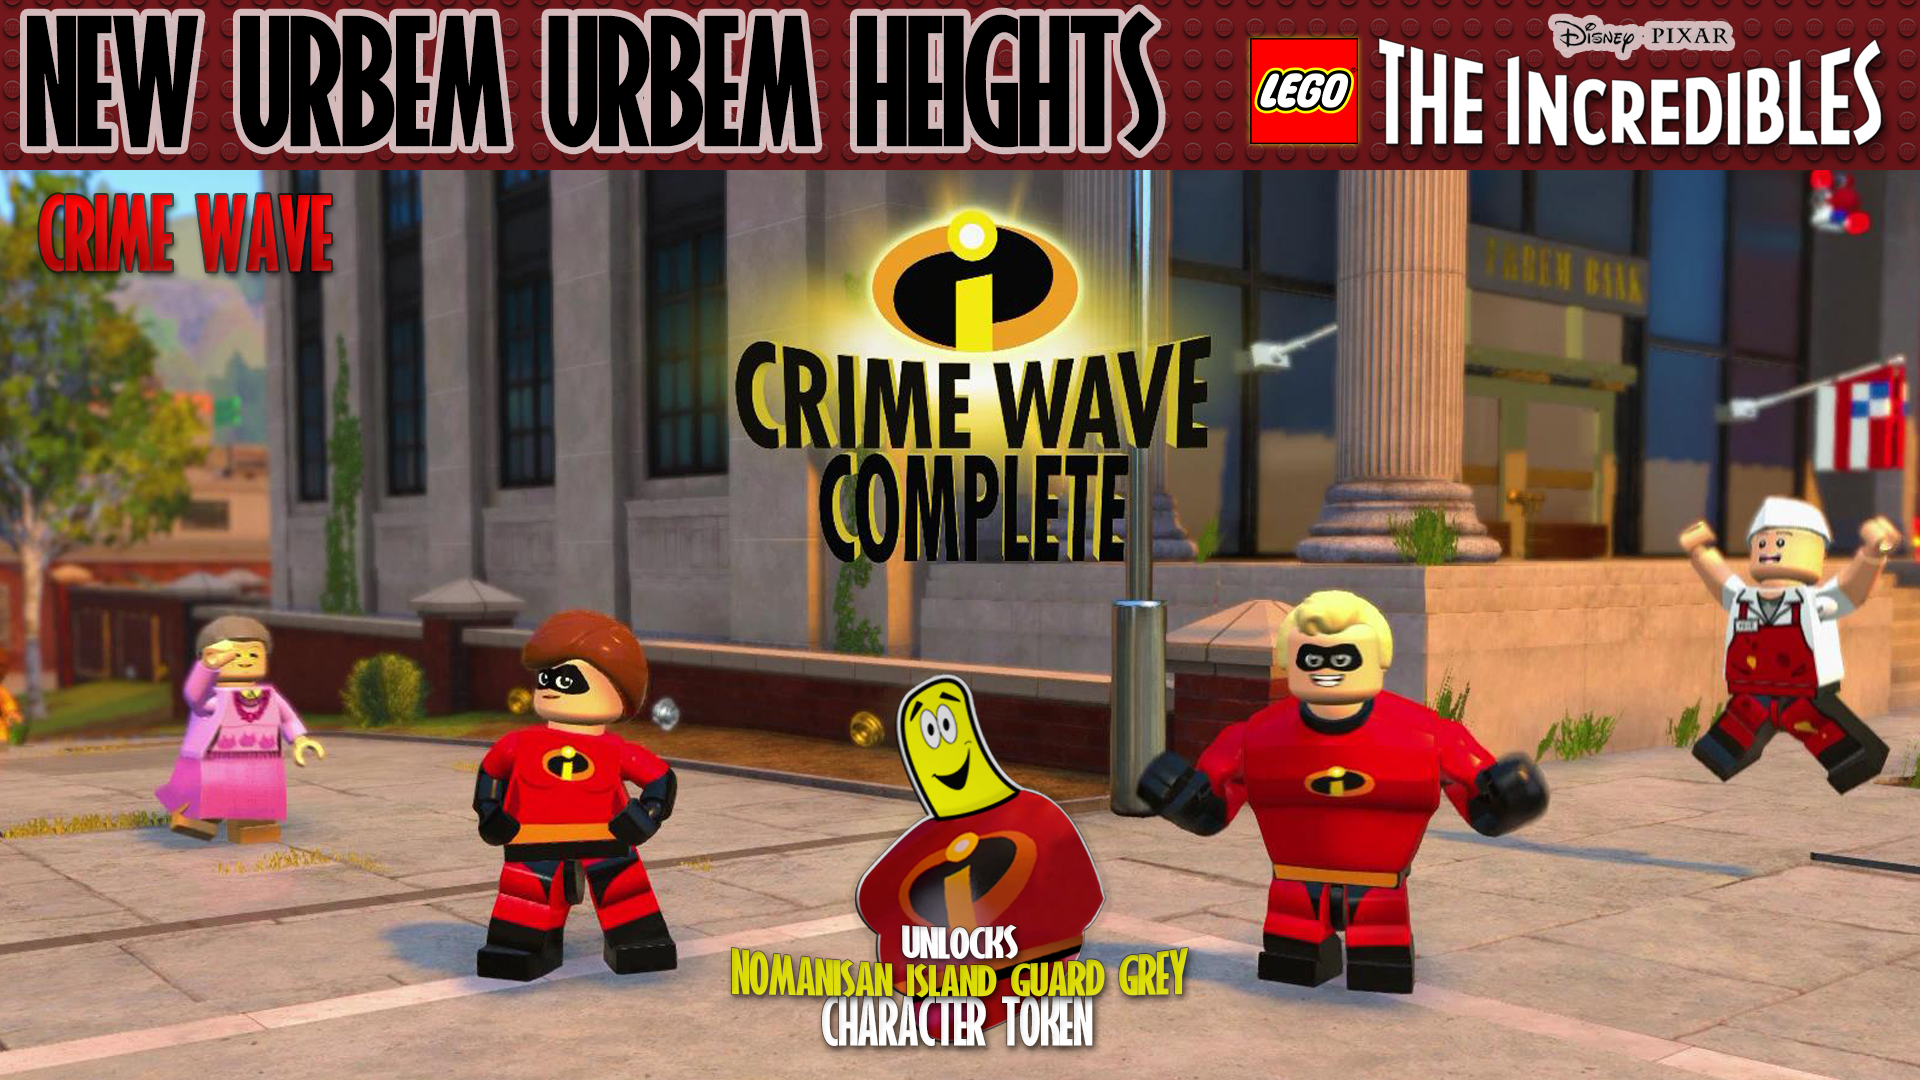 Lego The Incredibles: New Urbem / Urbem Heights CRIME WAVE – HTG